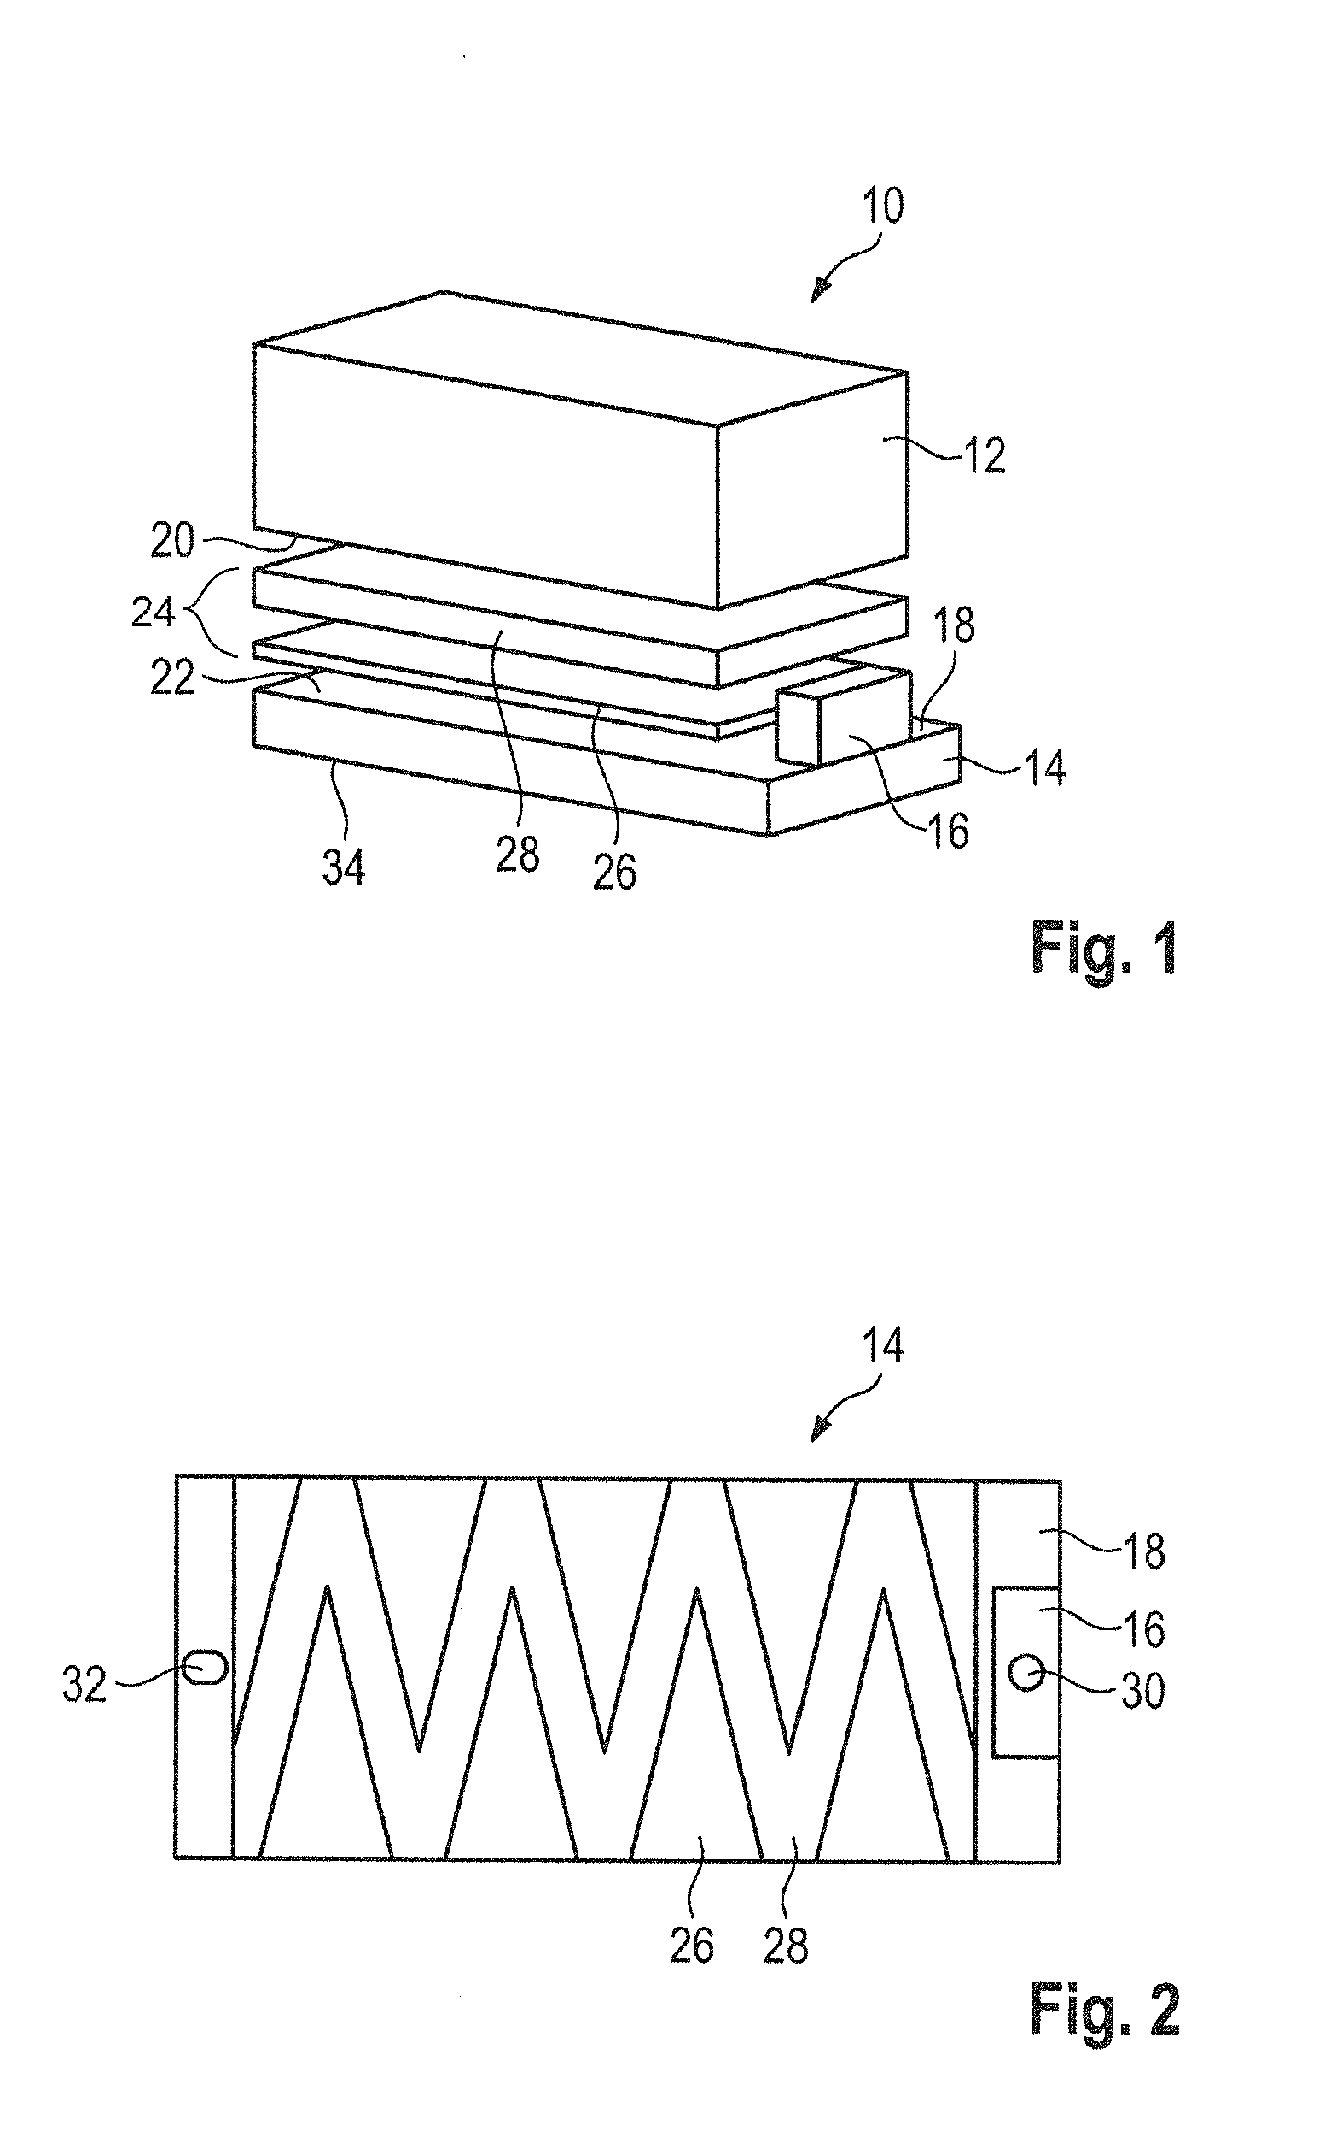 Method for Producing an Assembly from an Energy Storage Module, and a Cooling Element and Assembly